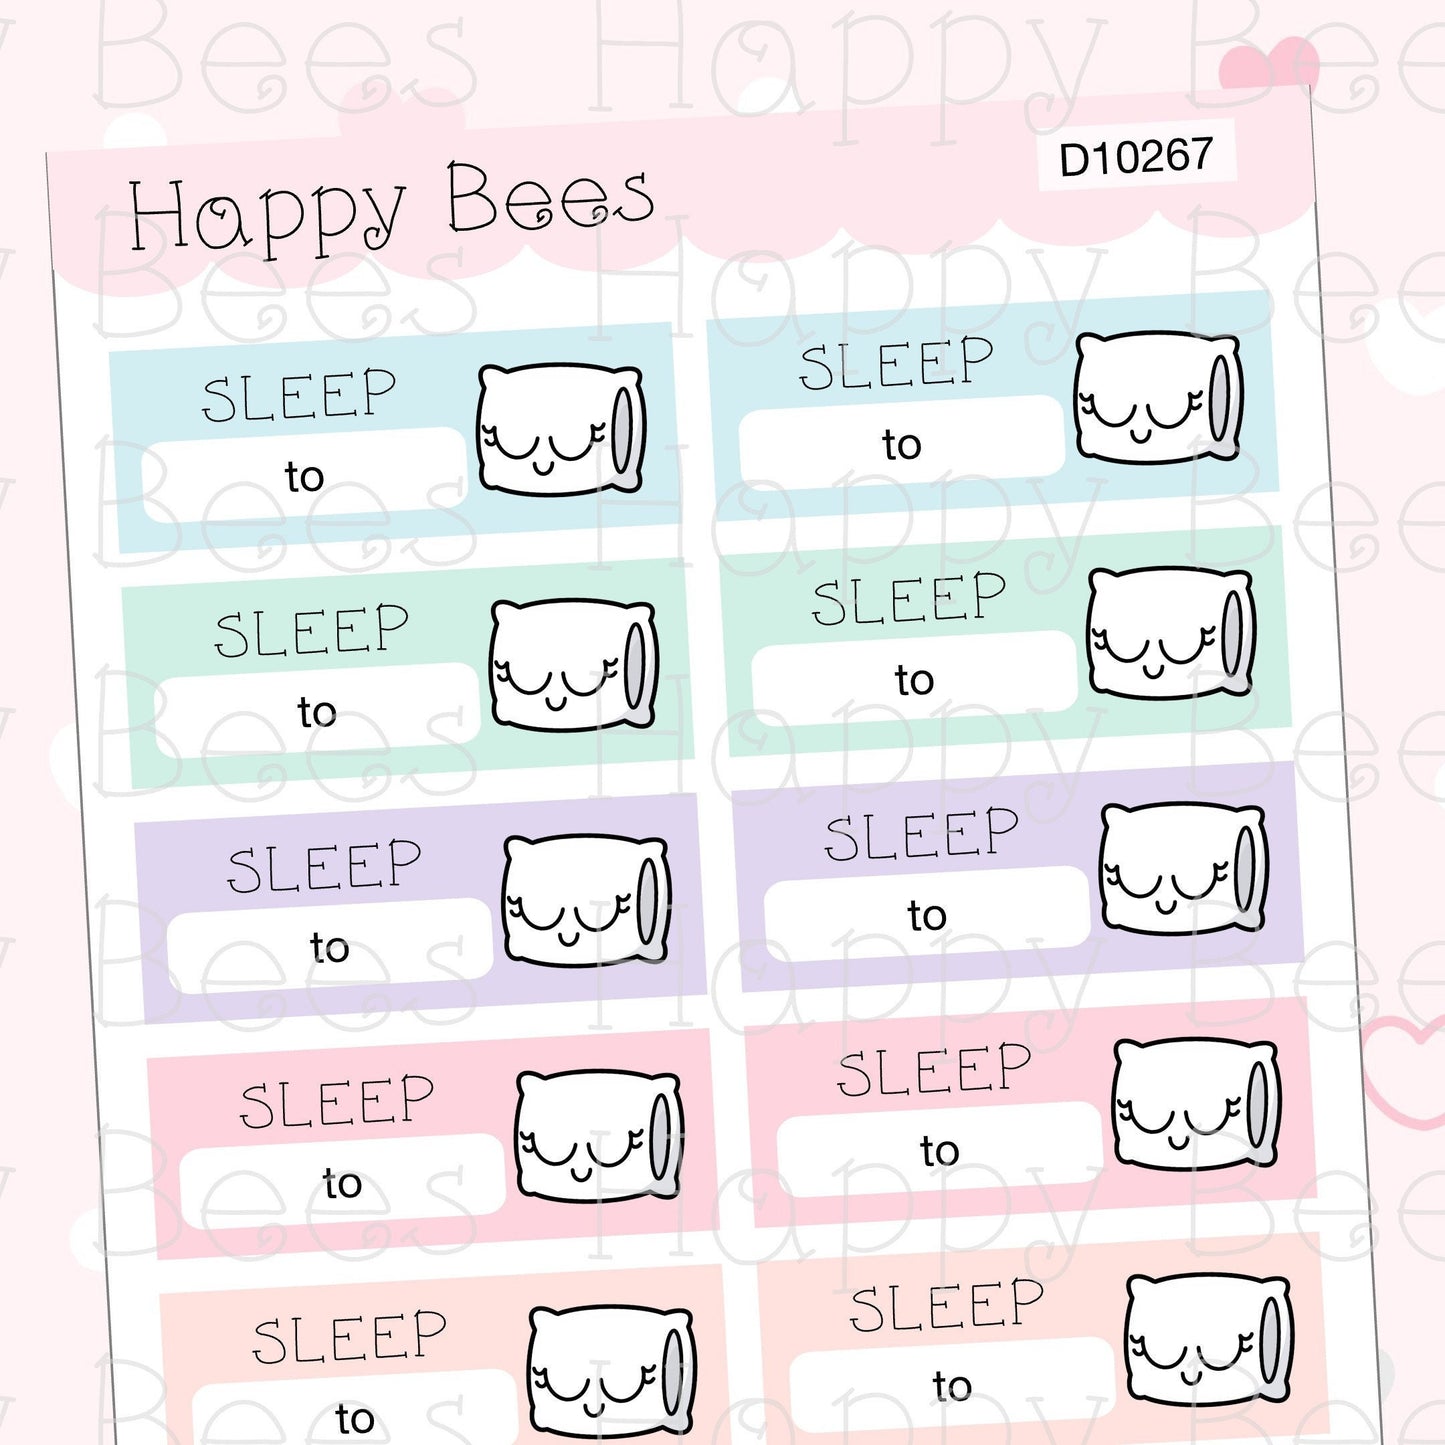 Daily Sleep Tracker Boxes - Cute Doodles Health Planner Stickers D10267